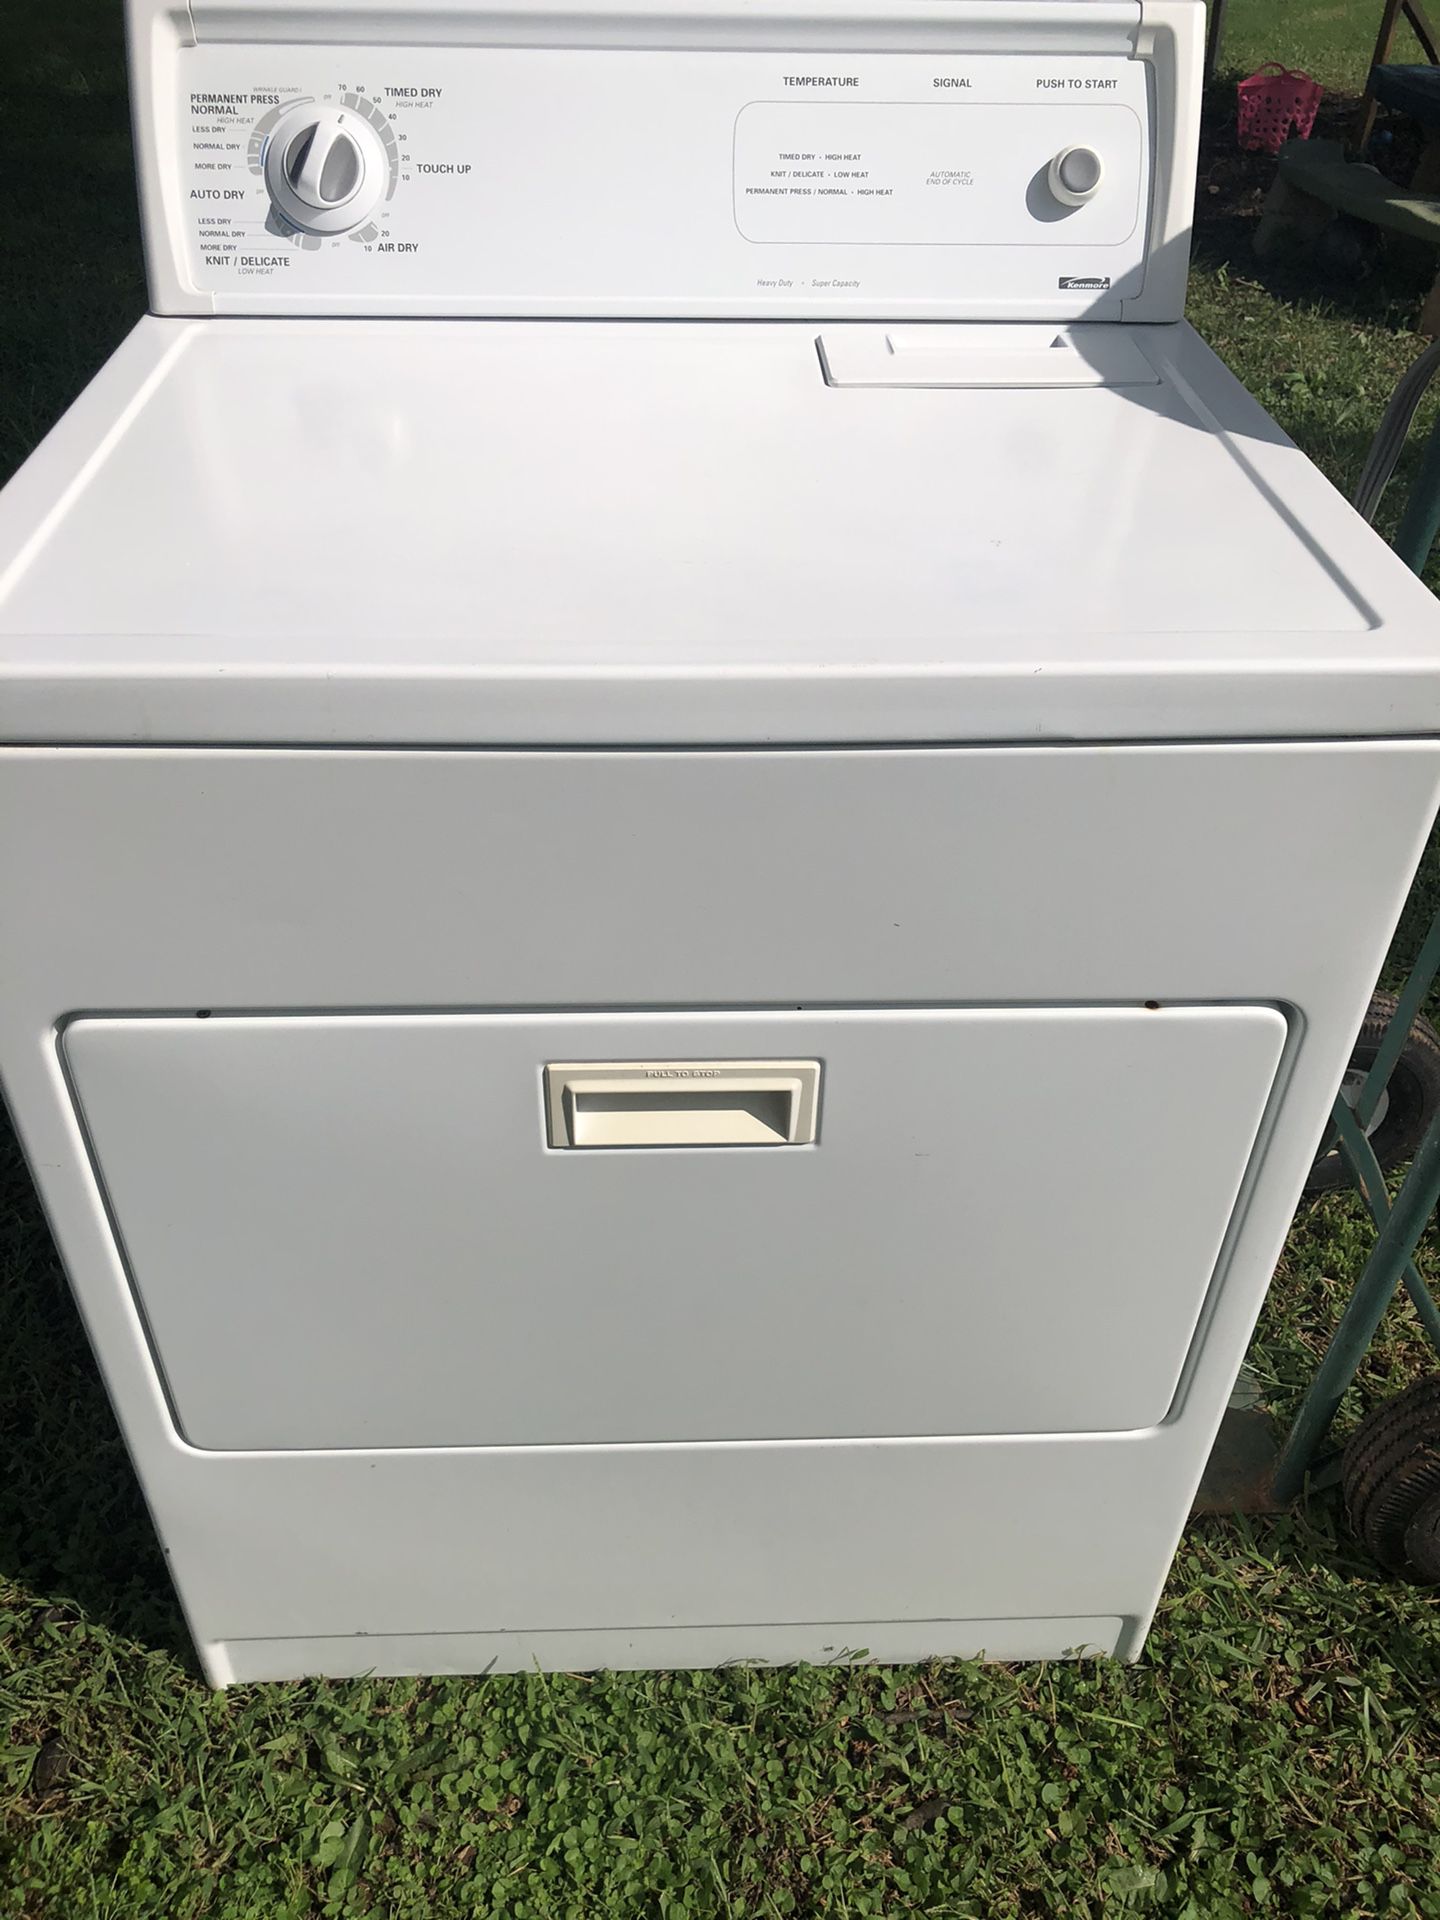 Kenmore dryer in perfect condition